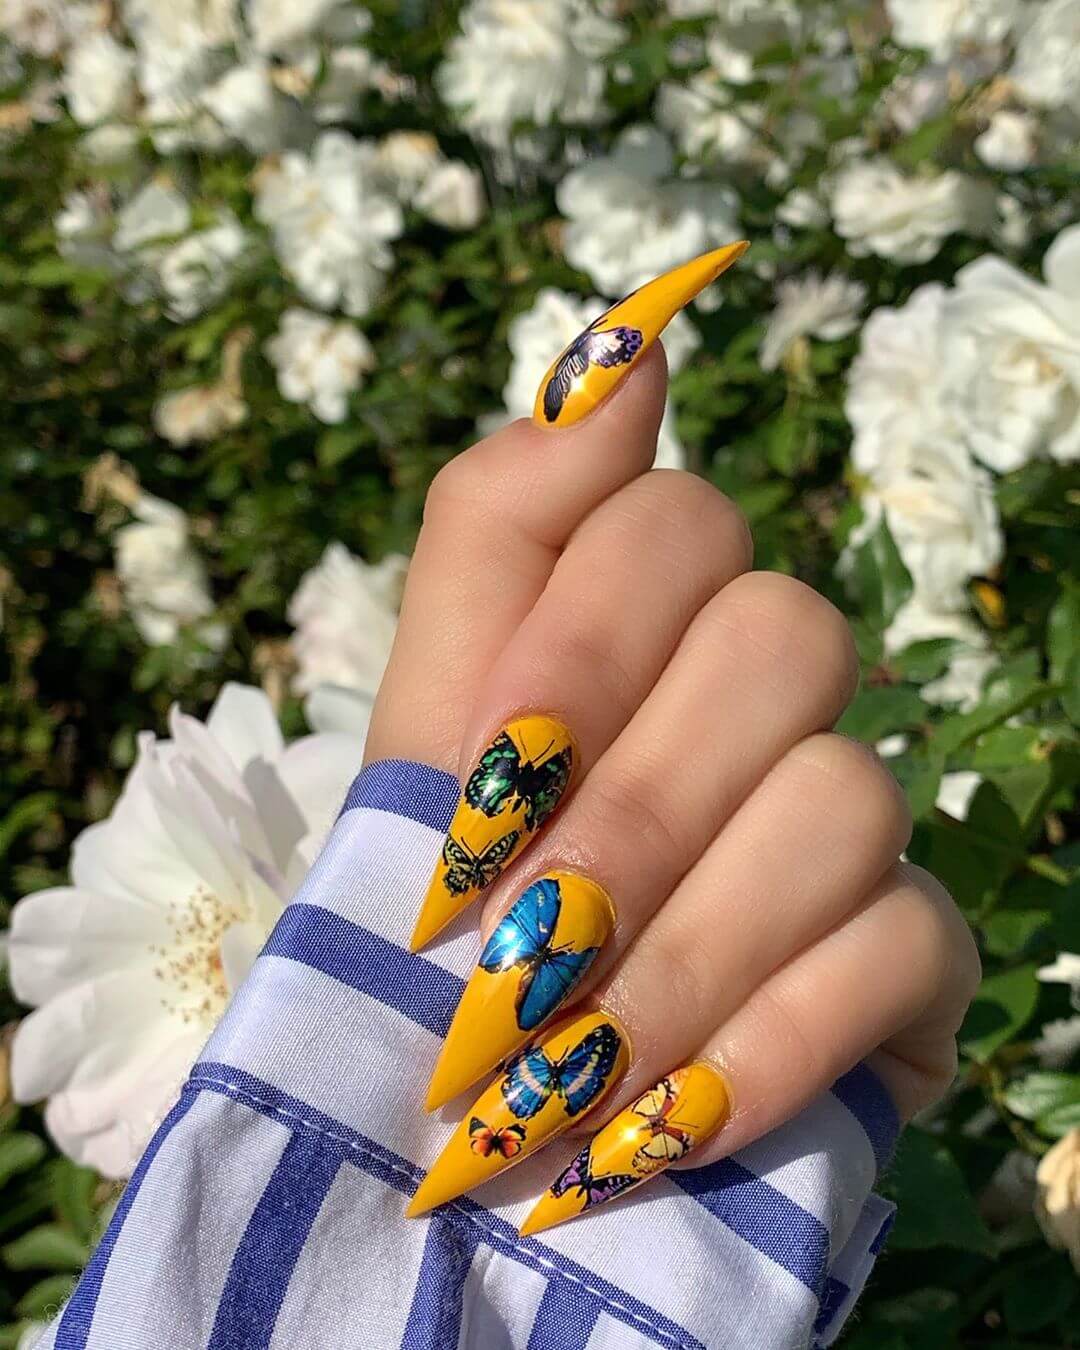 Adding Fashion And Contrast To The Pointed Nail Art